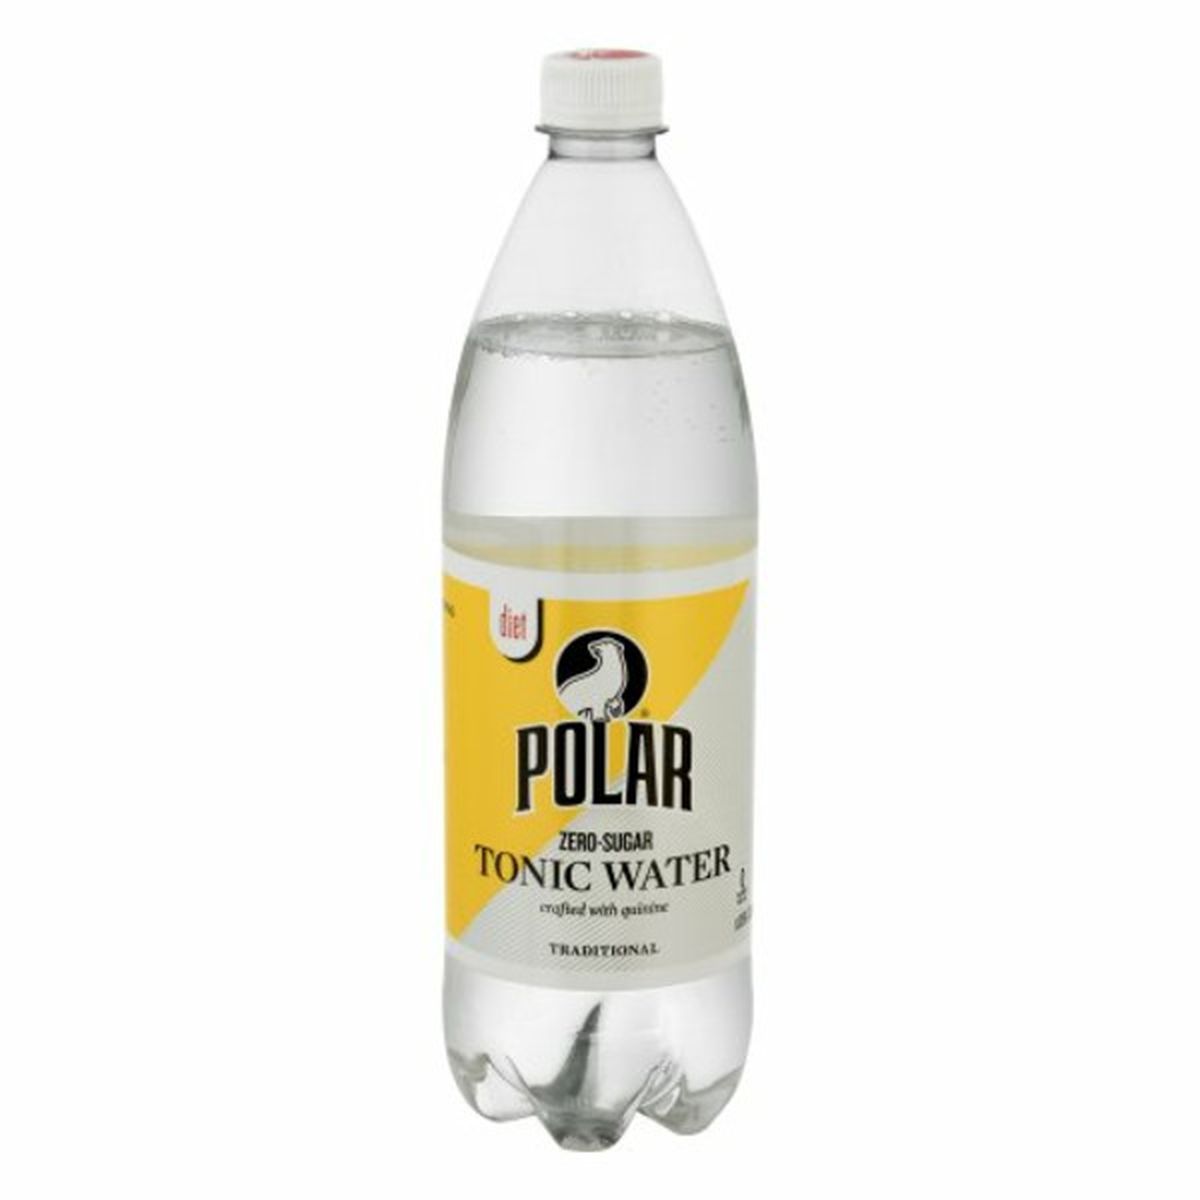 Calories in Polar Tonic Water, Diet, Traditional